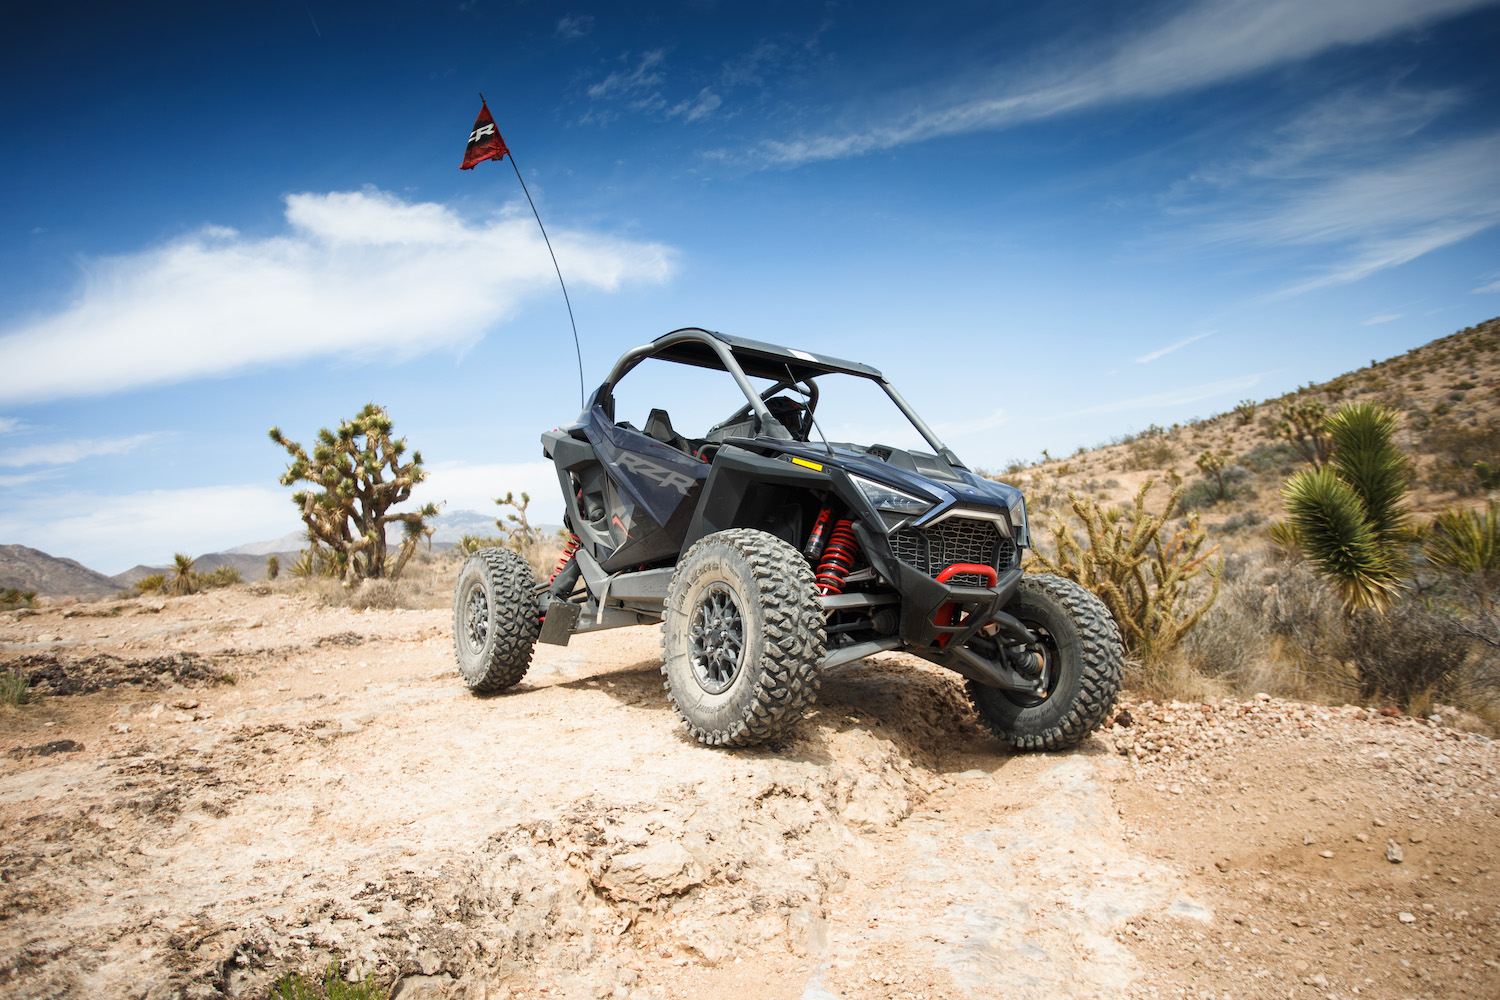 Close up of Polaris RZR Pro R driving down a rocky trail in the desert.